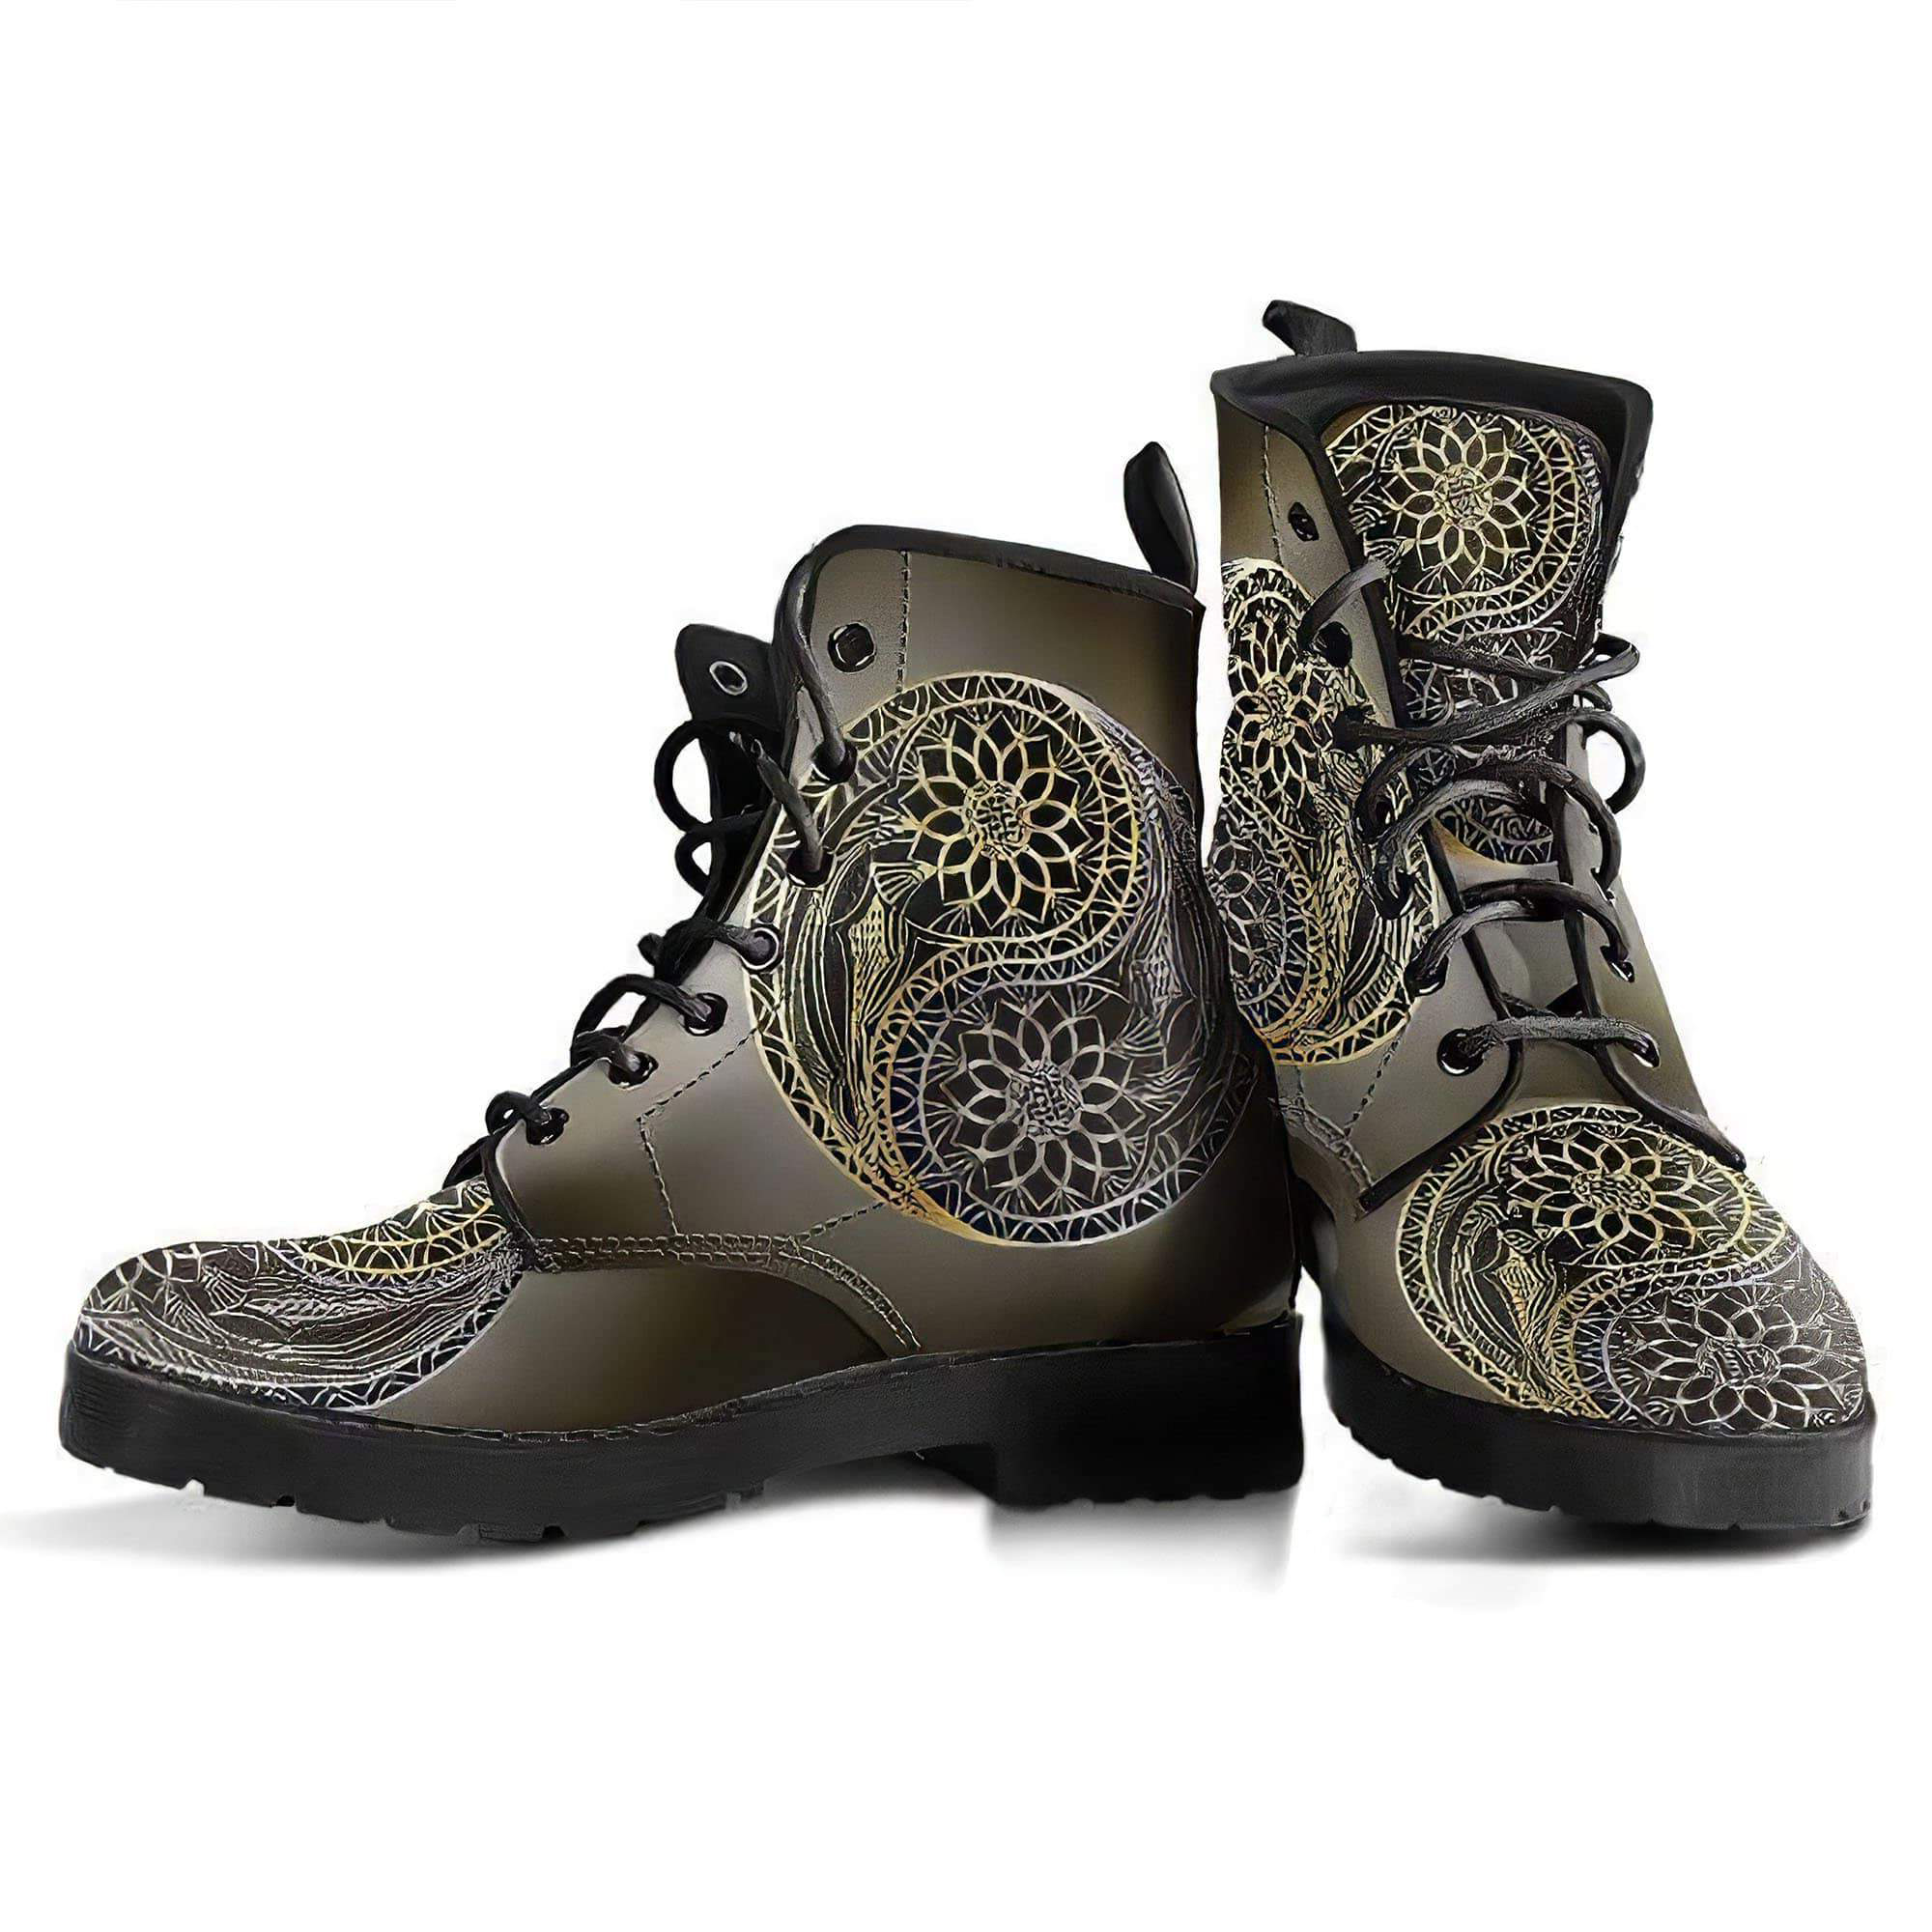 yinyang-mandala-4-handcrafted-boots-women-s-leather-boots-12051983761469.jpg